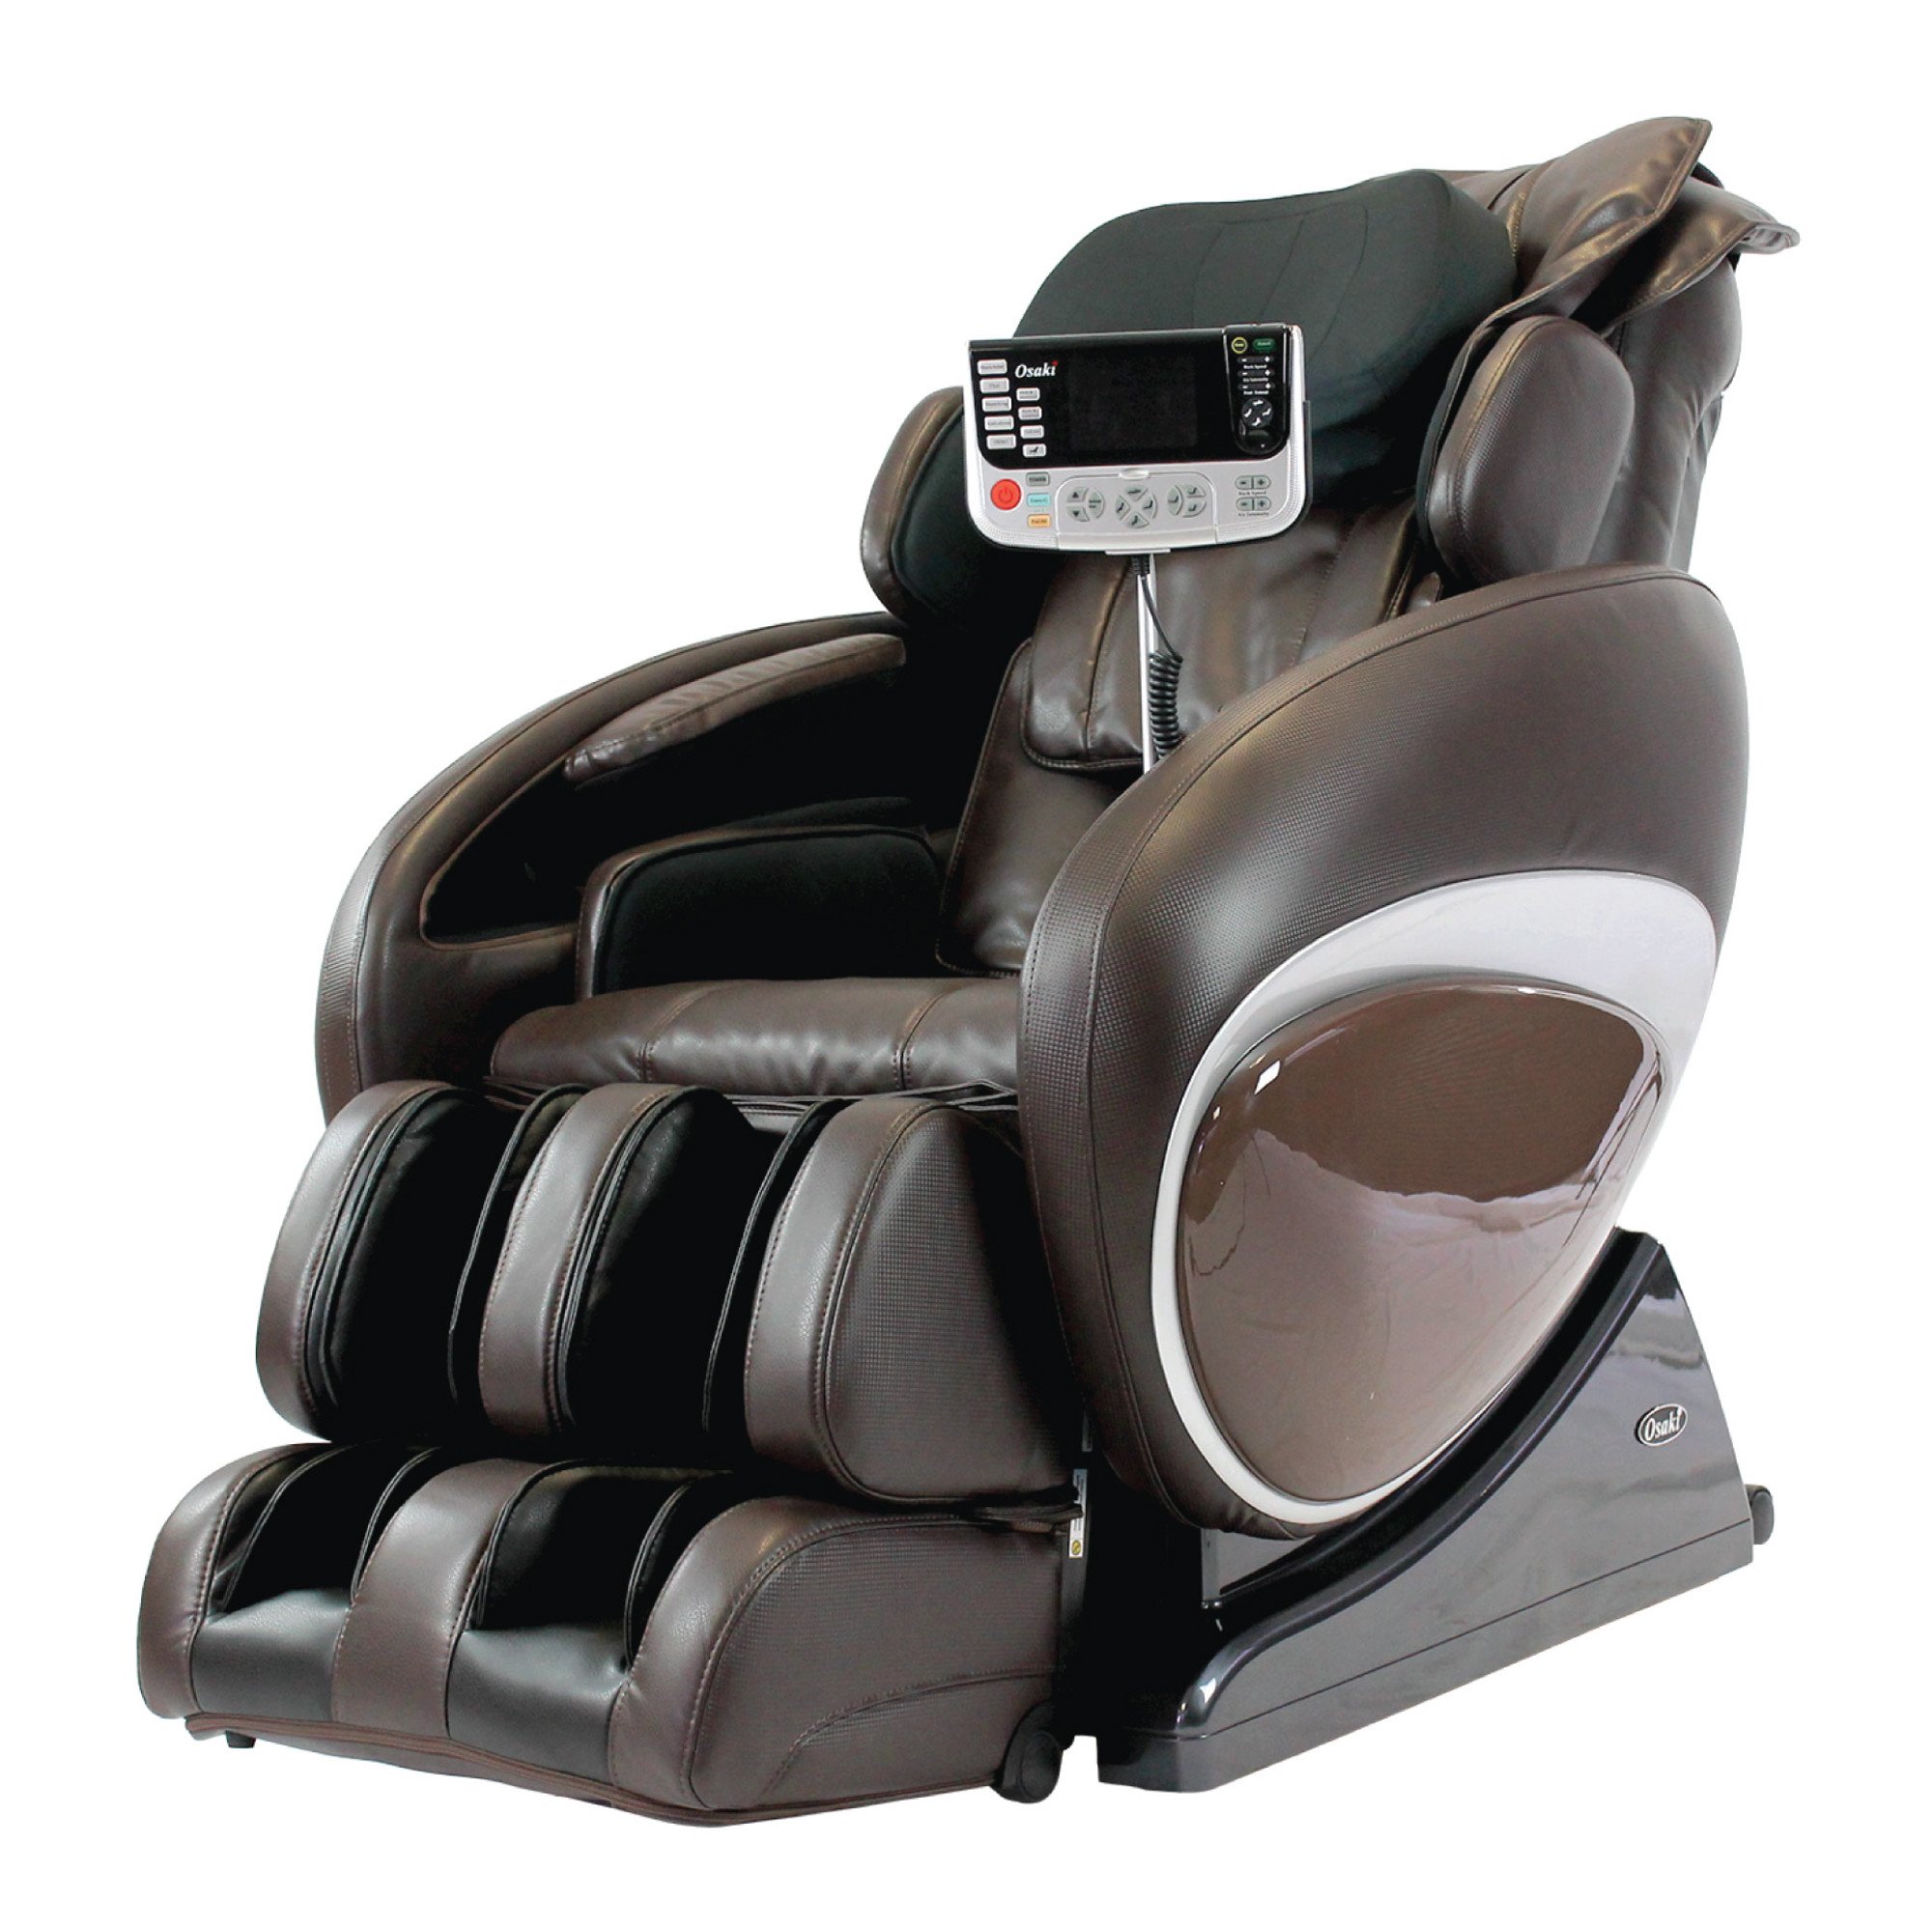 Osaki 4000T Massage Chair - Charcoal - Front Angle View